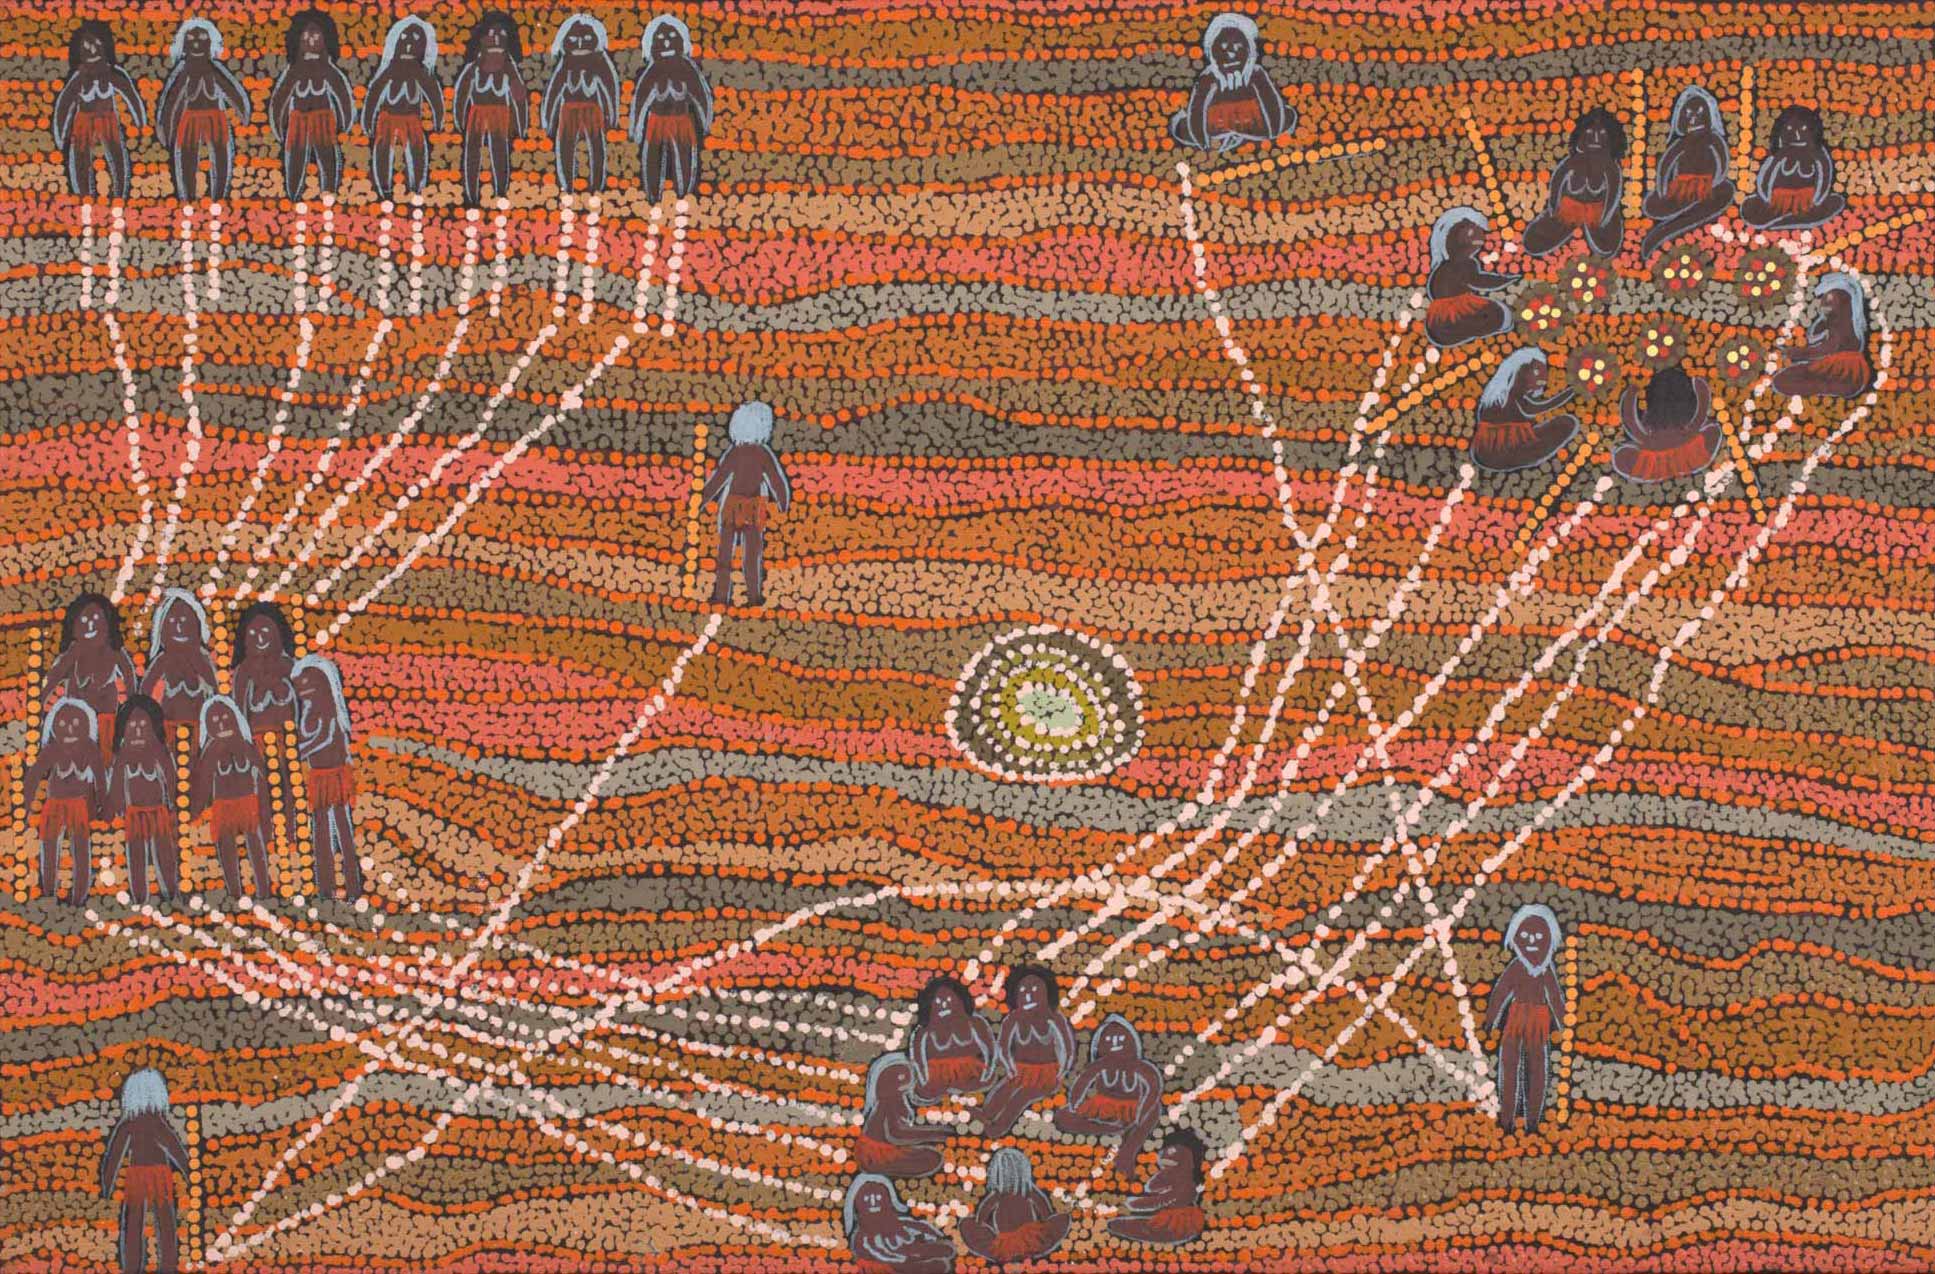 An acrylic painting on canvas showing groups of people and individuals, connected by white dotted lines. The background is made of dot infill in predominantly red and orange tones.